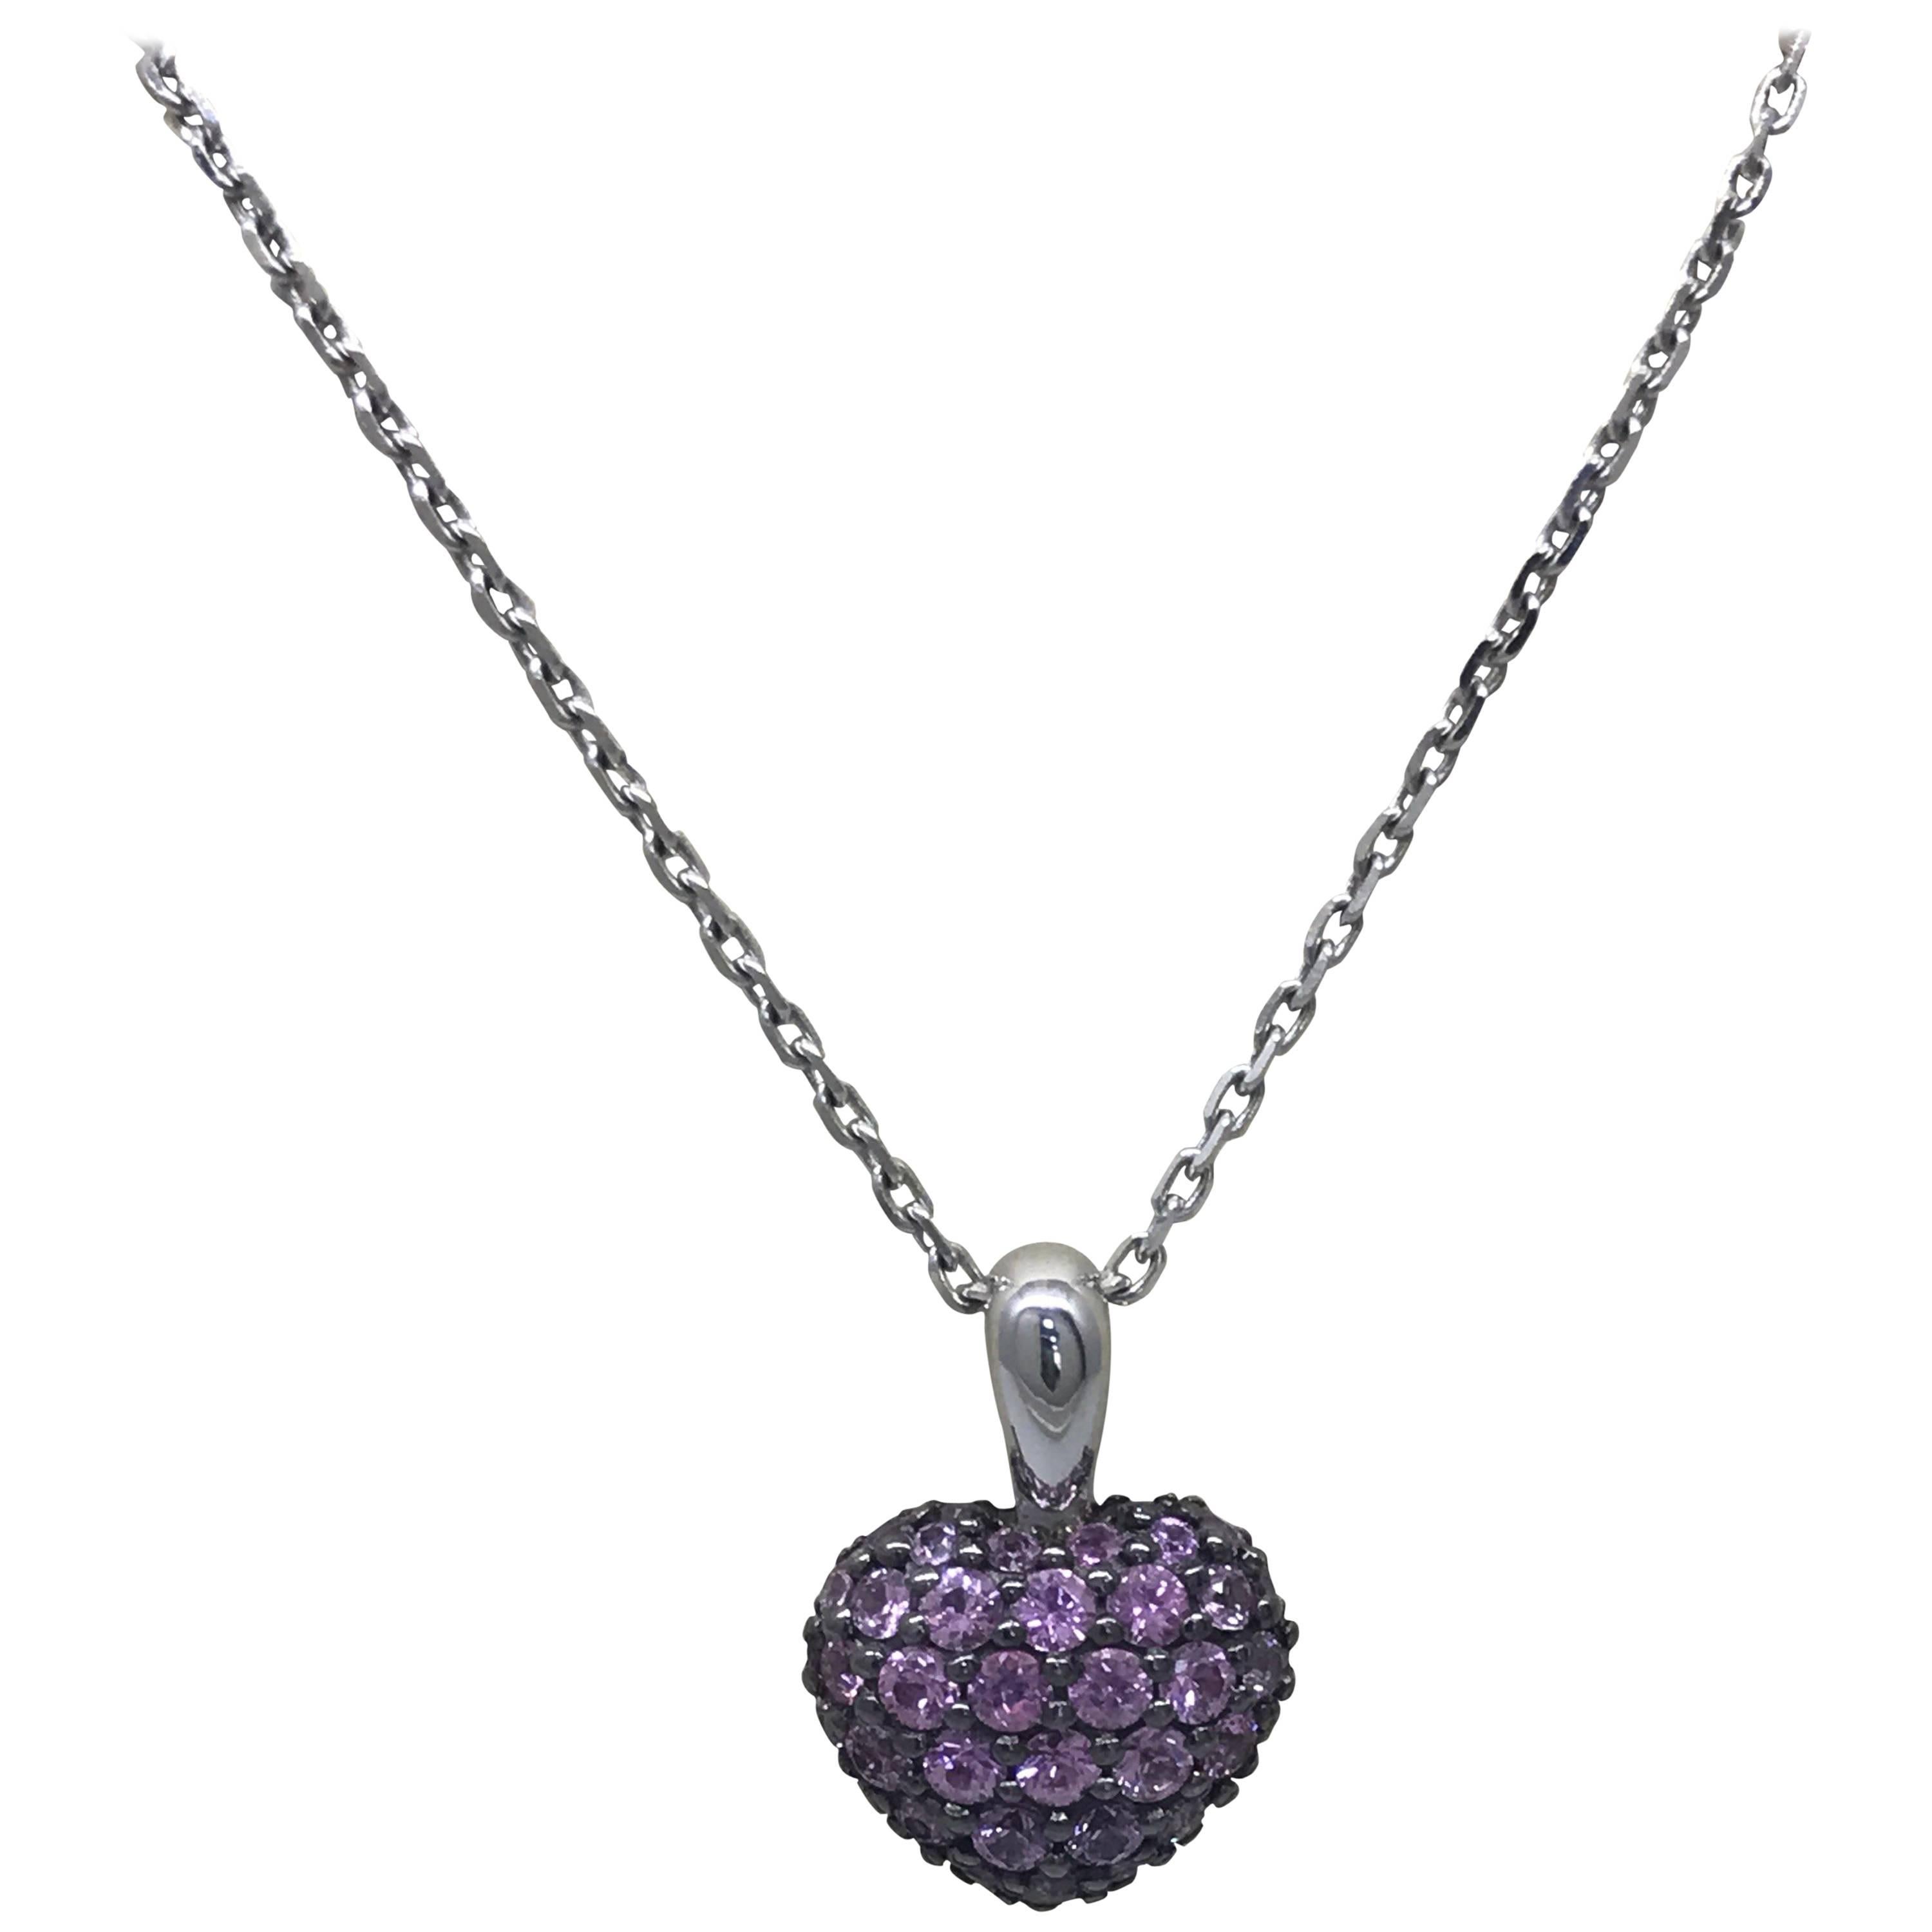 Chopard Heart Shaped Pendant 18 Karat White Gold Pink Sapphires New For Sale